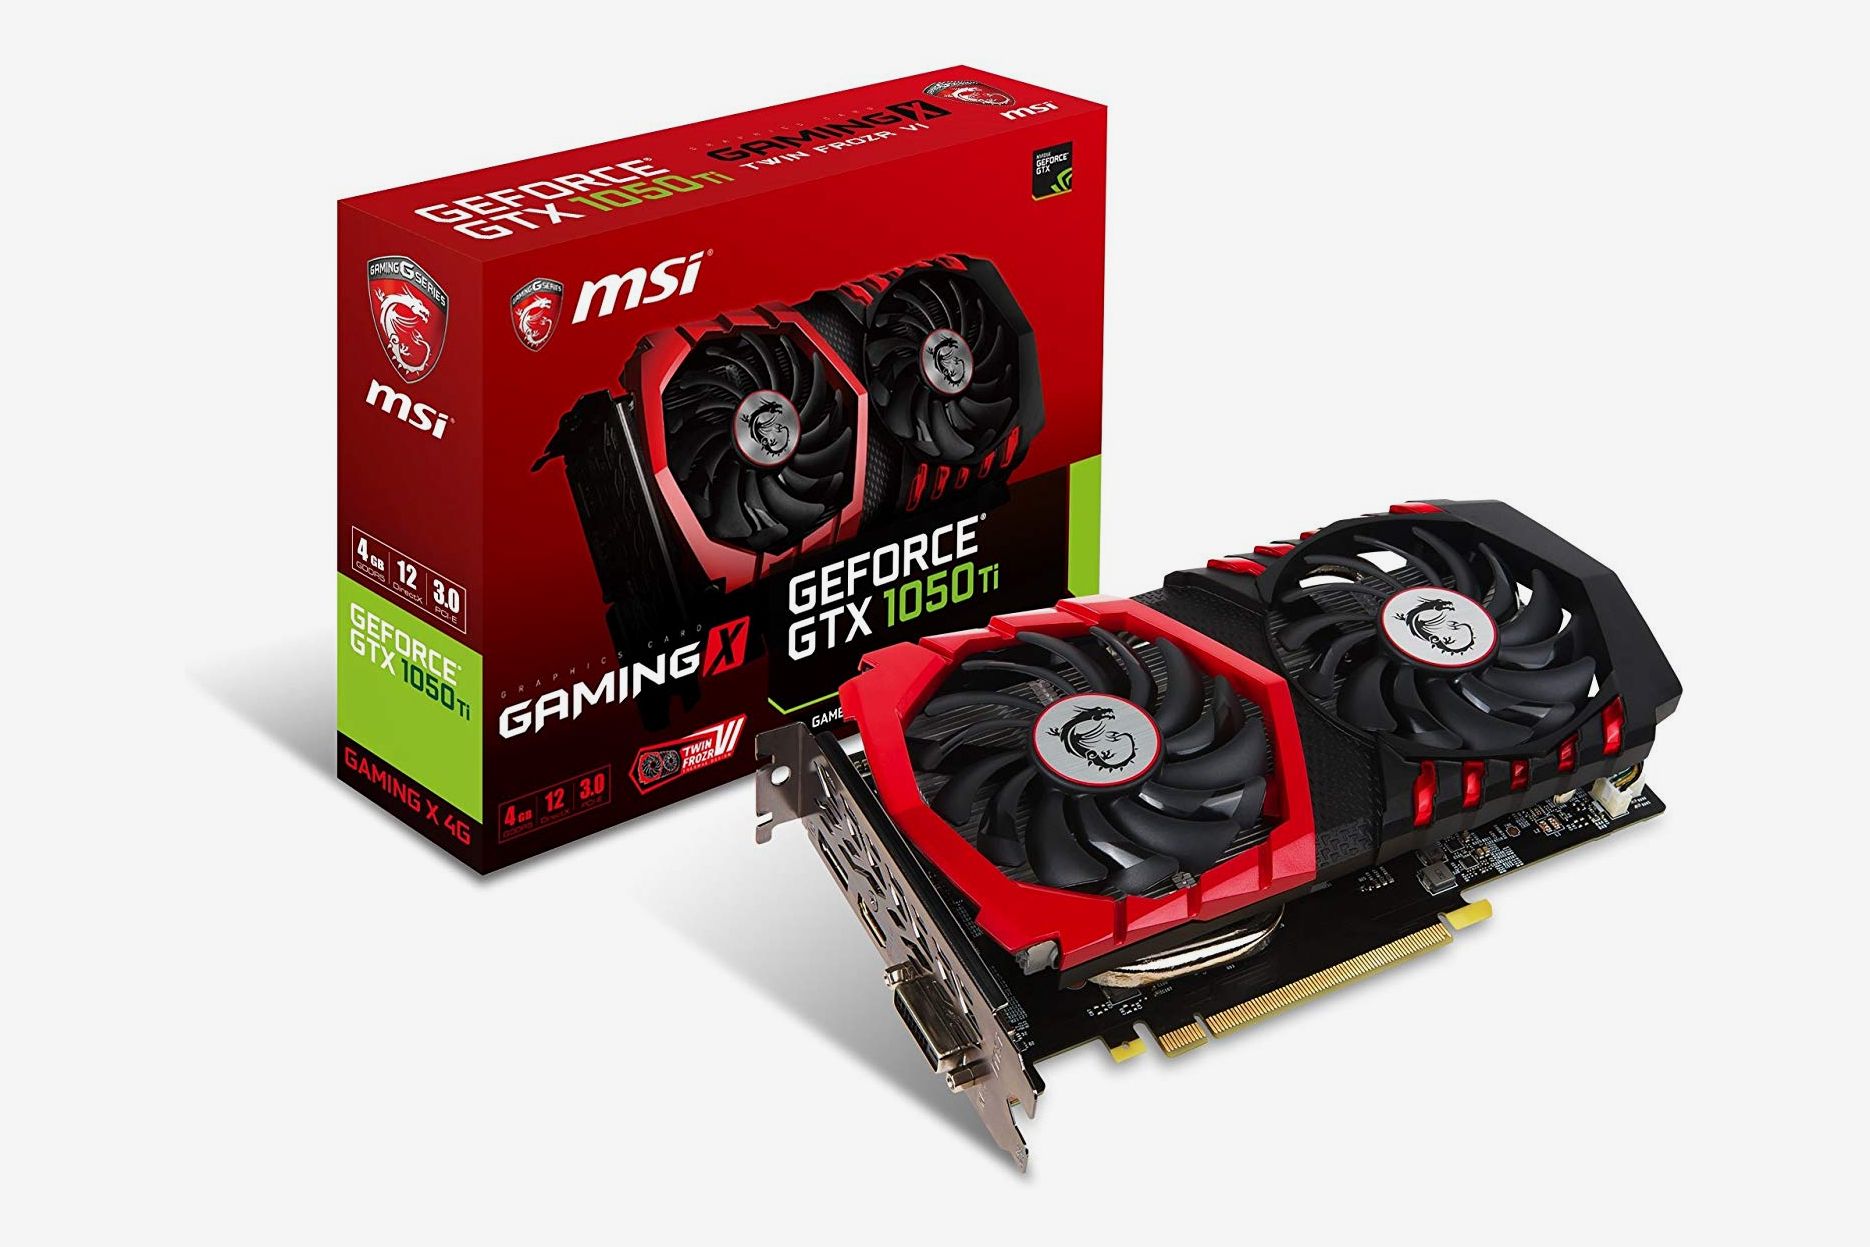 12 Best Computer Graphics Cards 2019 | The Strategist